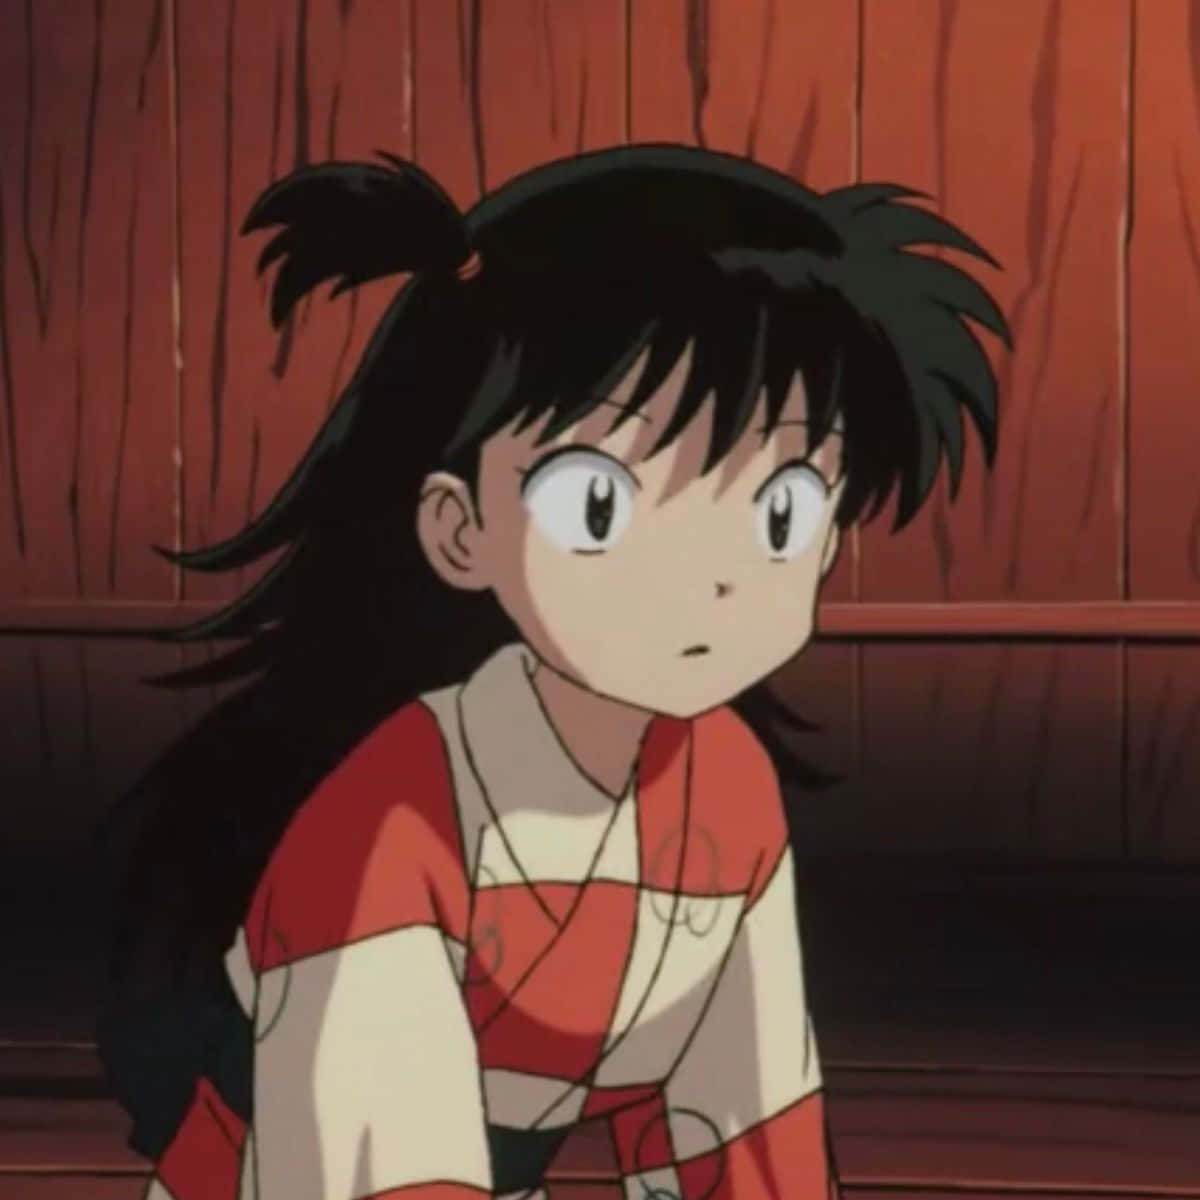 Rin from Inuyasha posing in a vibrant and colorful scene. Wallpaper